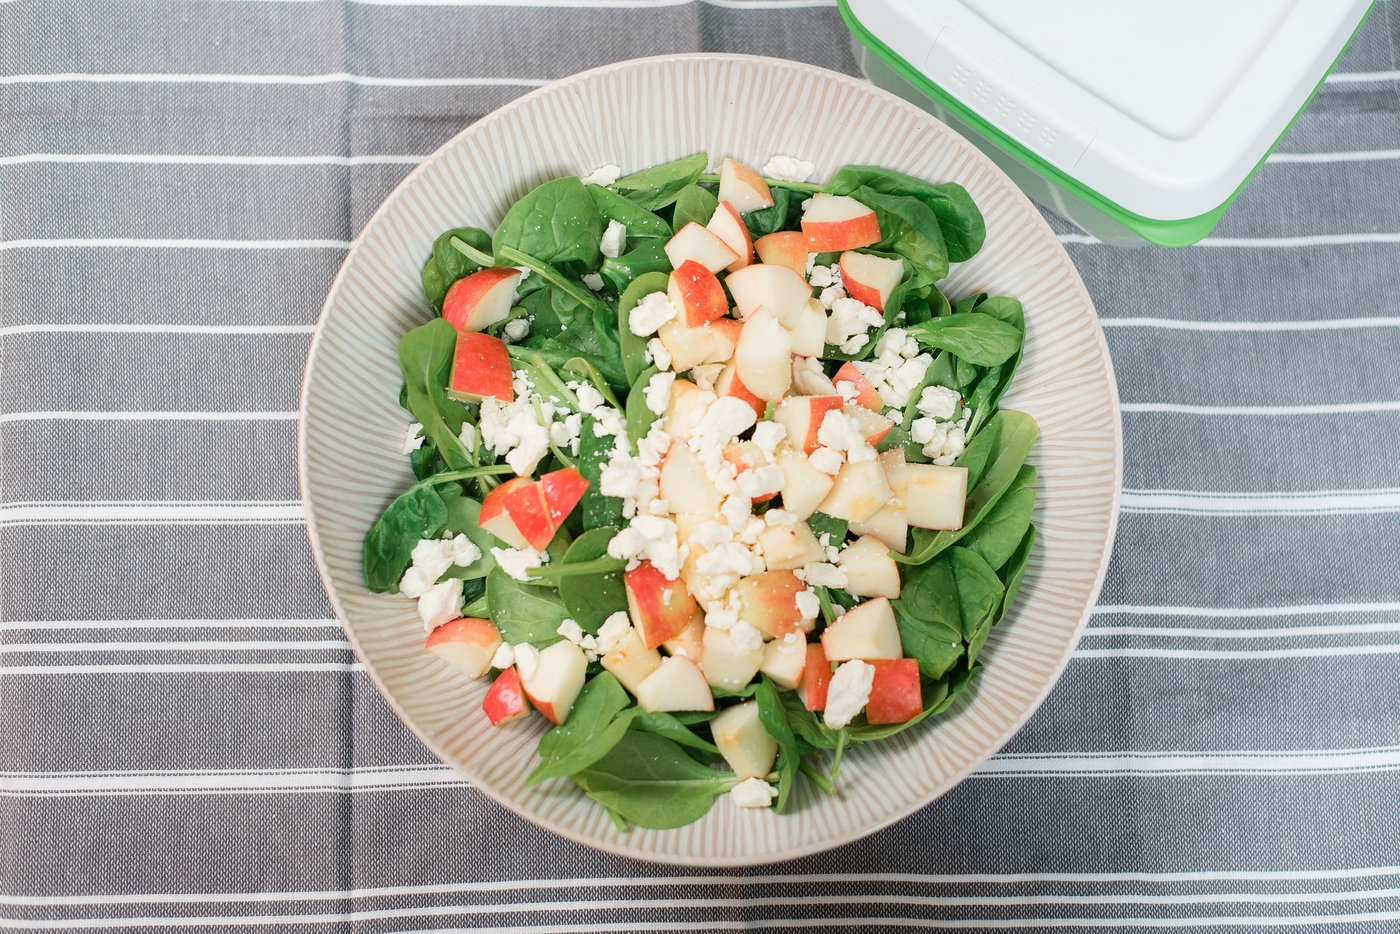 Green Apple And Spinach Salad by Alabama Health + Food blogger, Heather Brown // My Life Well Loved